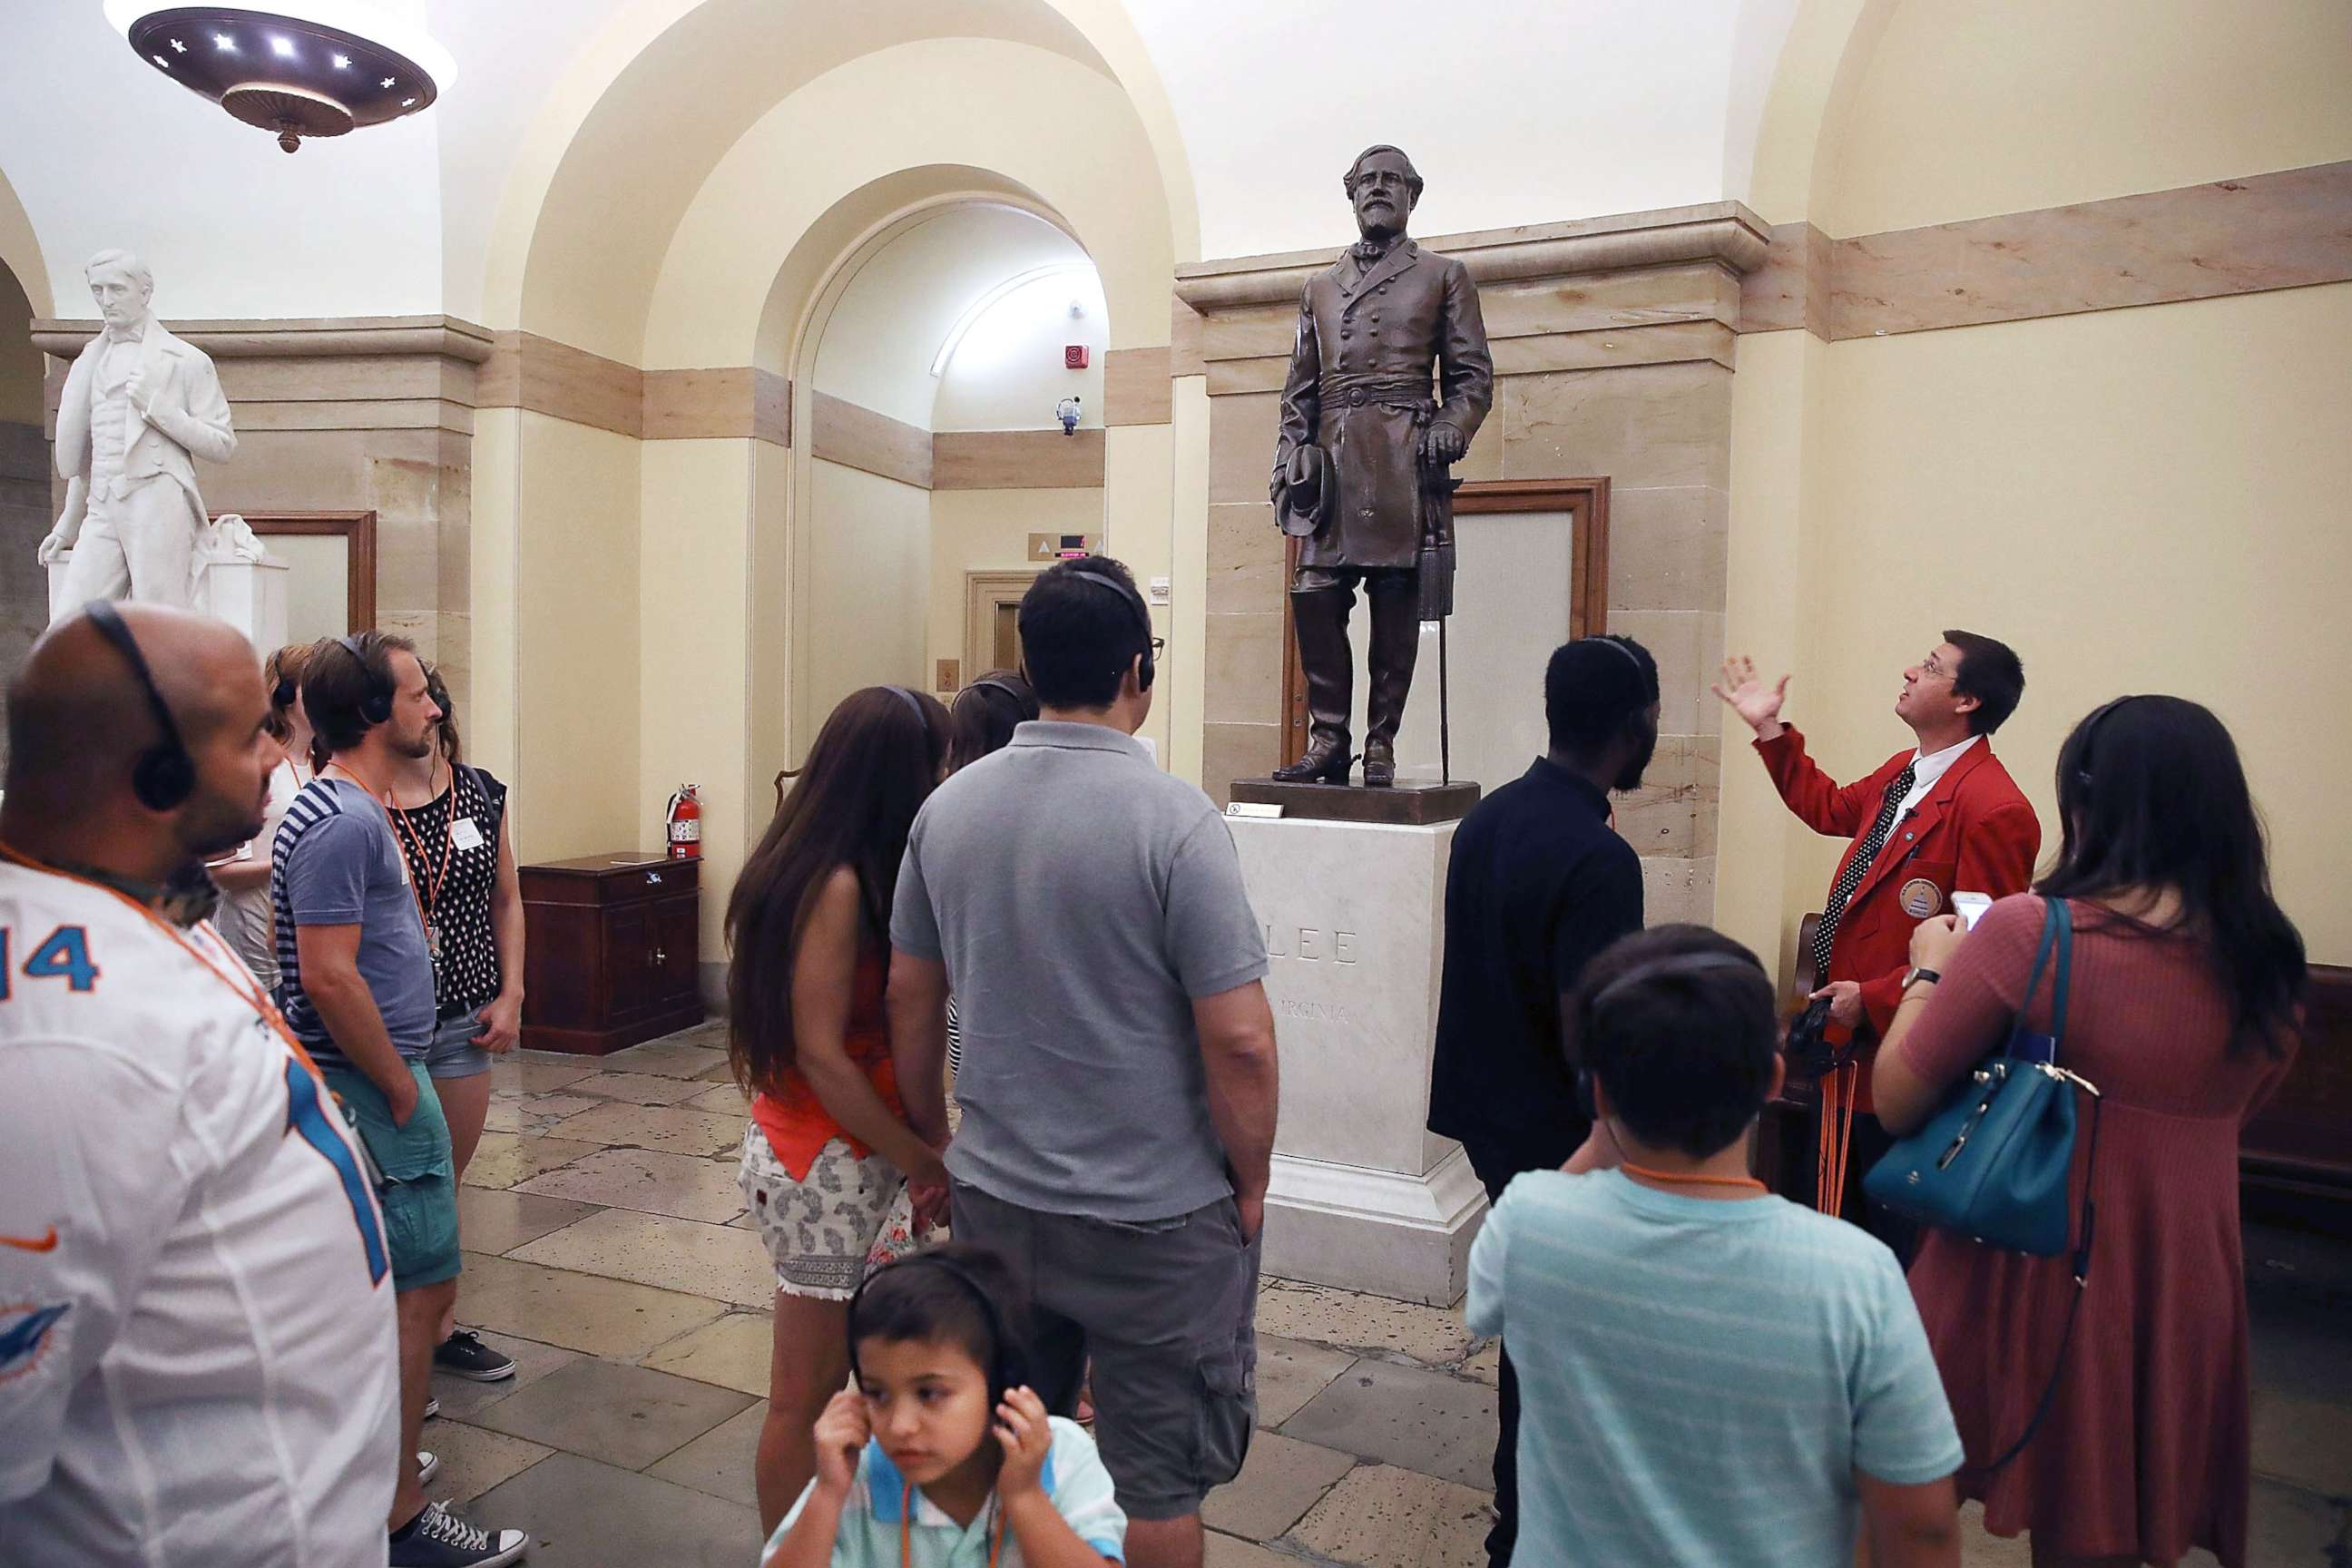 PHOTO: A tour guide talks about the Statue of Confederate General Robert E. Lee that is located inside the Capitol, Aug.17, 2017, in Washington, DC. 